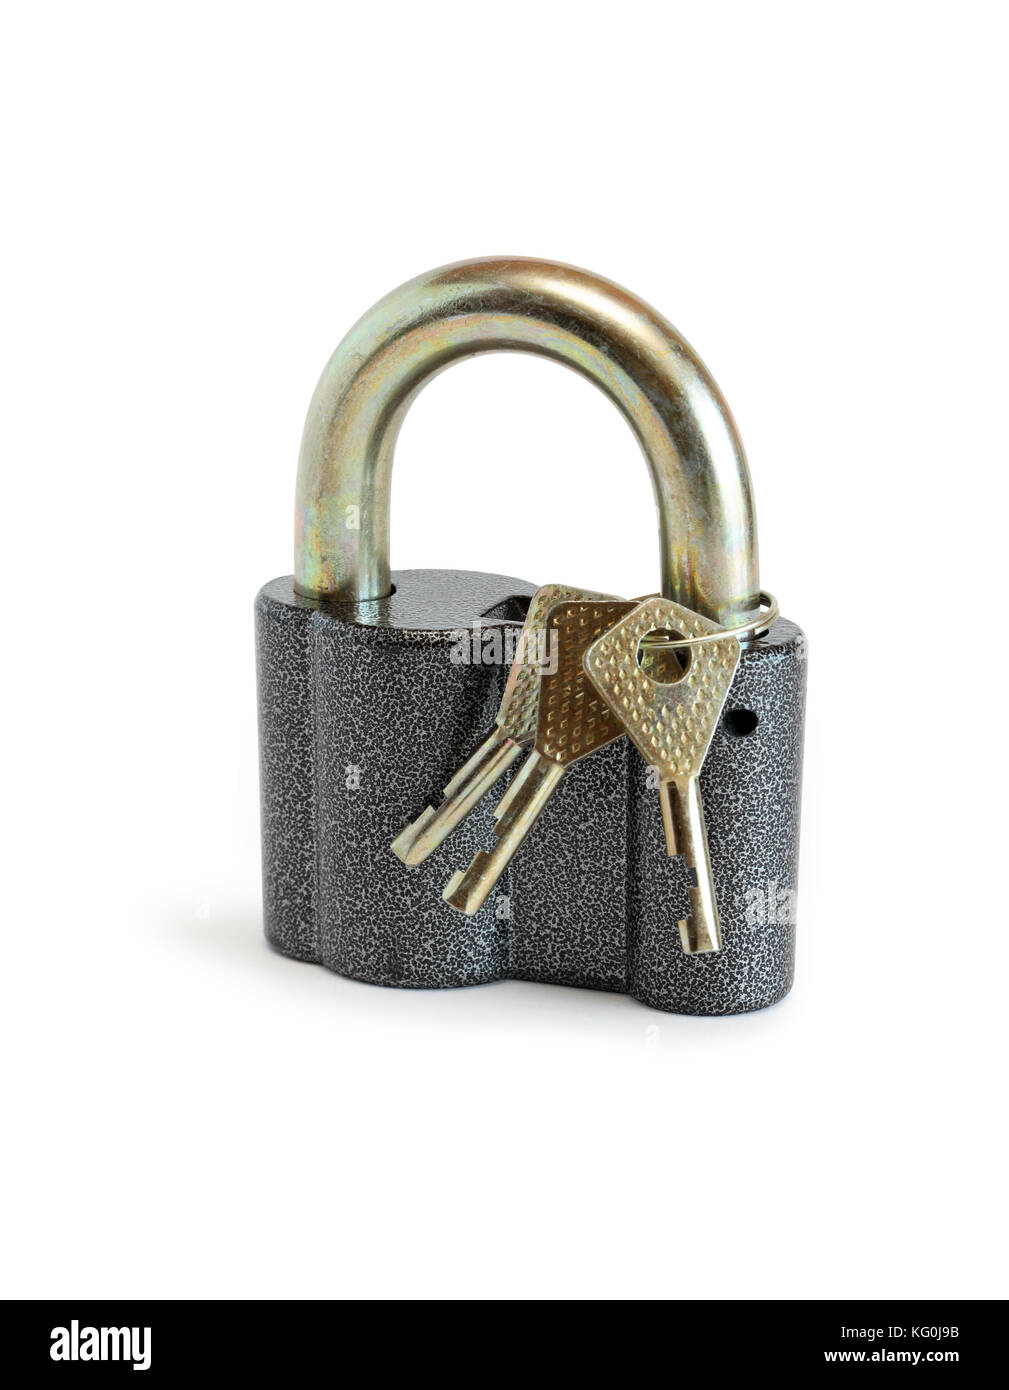 Three keys attached with padlock on white background. Isolated with clipping path Stock Photo